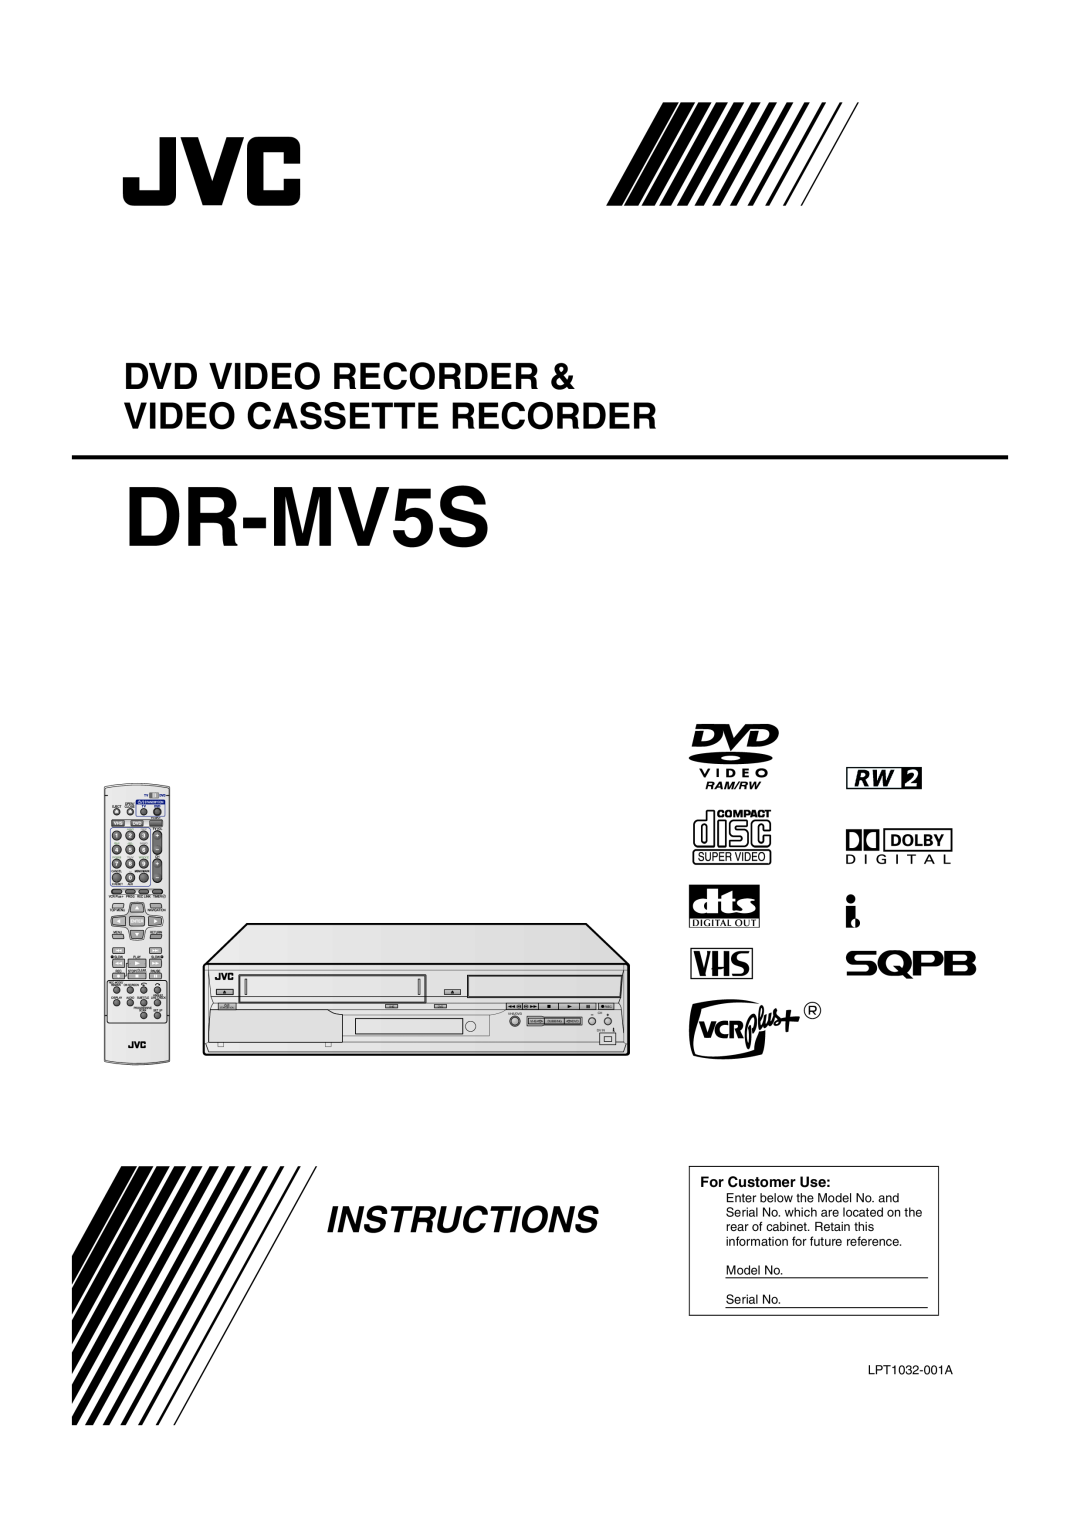 JVC DR-MV5S manual Instructions, Dvd Video Recorder & Video Cassette Recorder, For Customer Use, Model No Serial No 